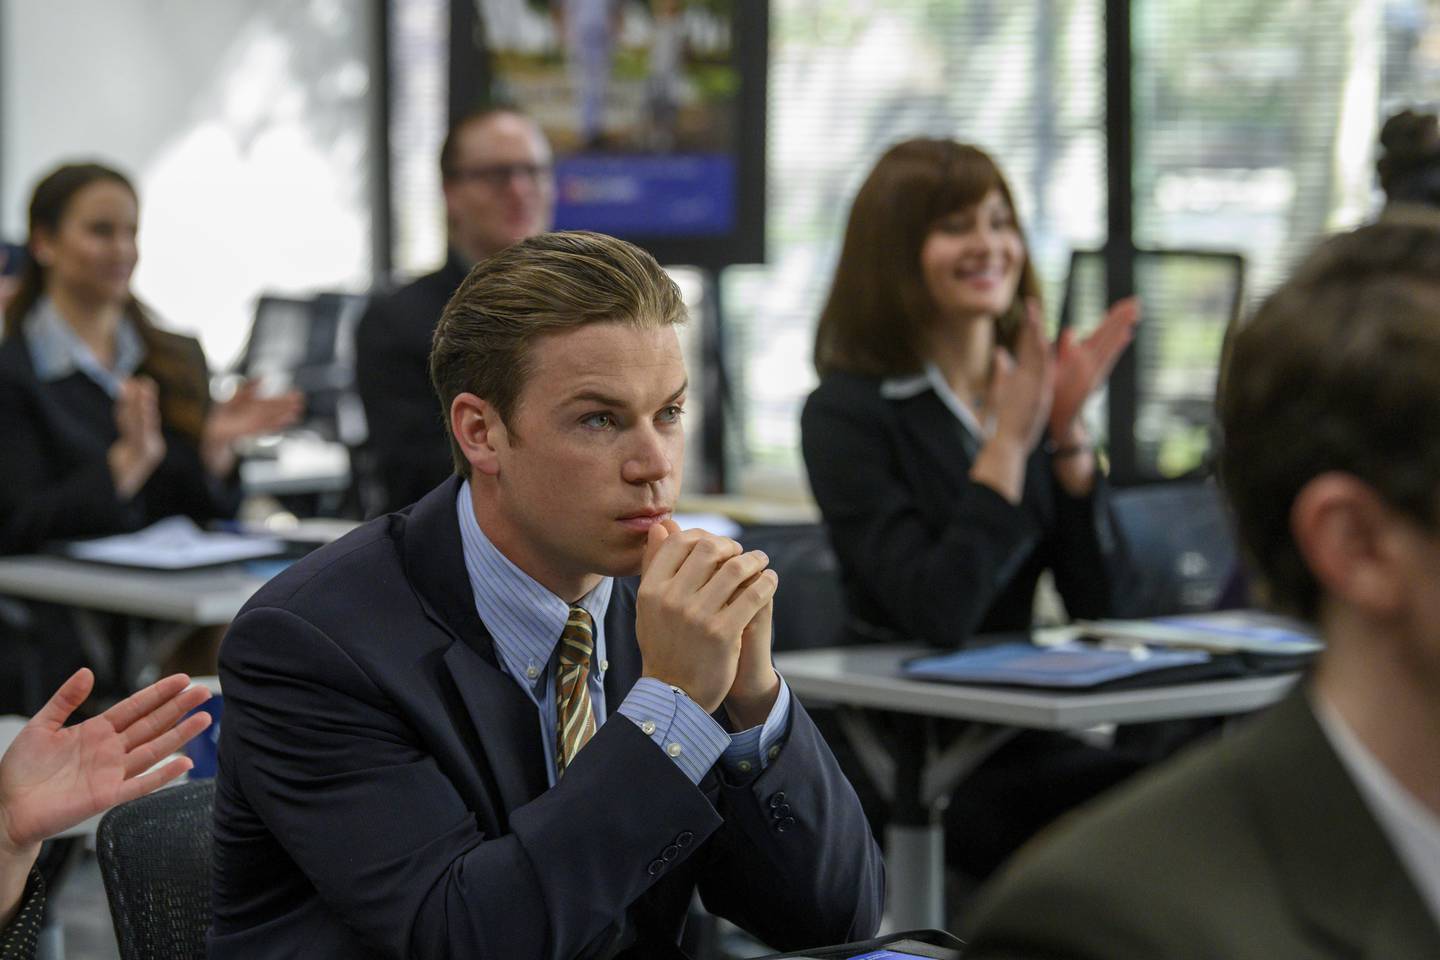 Will Poulter in a scene from 'Dopesick'. Photo: Hulu